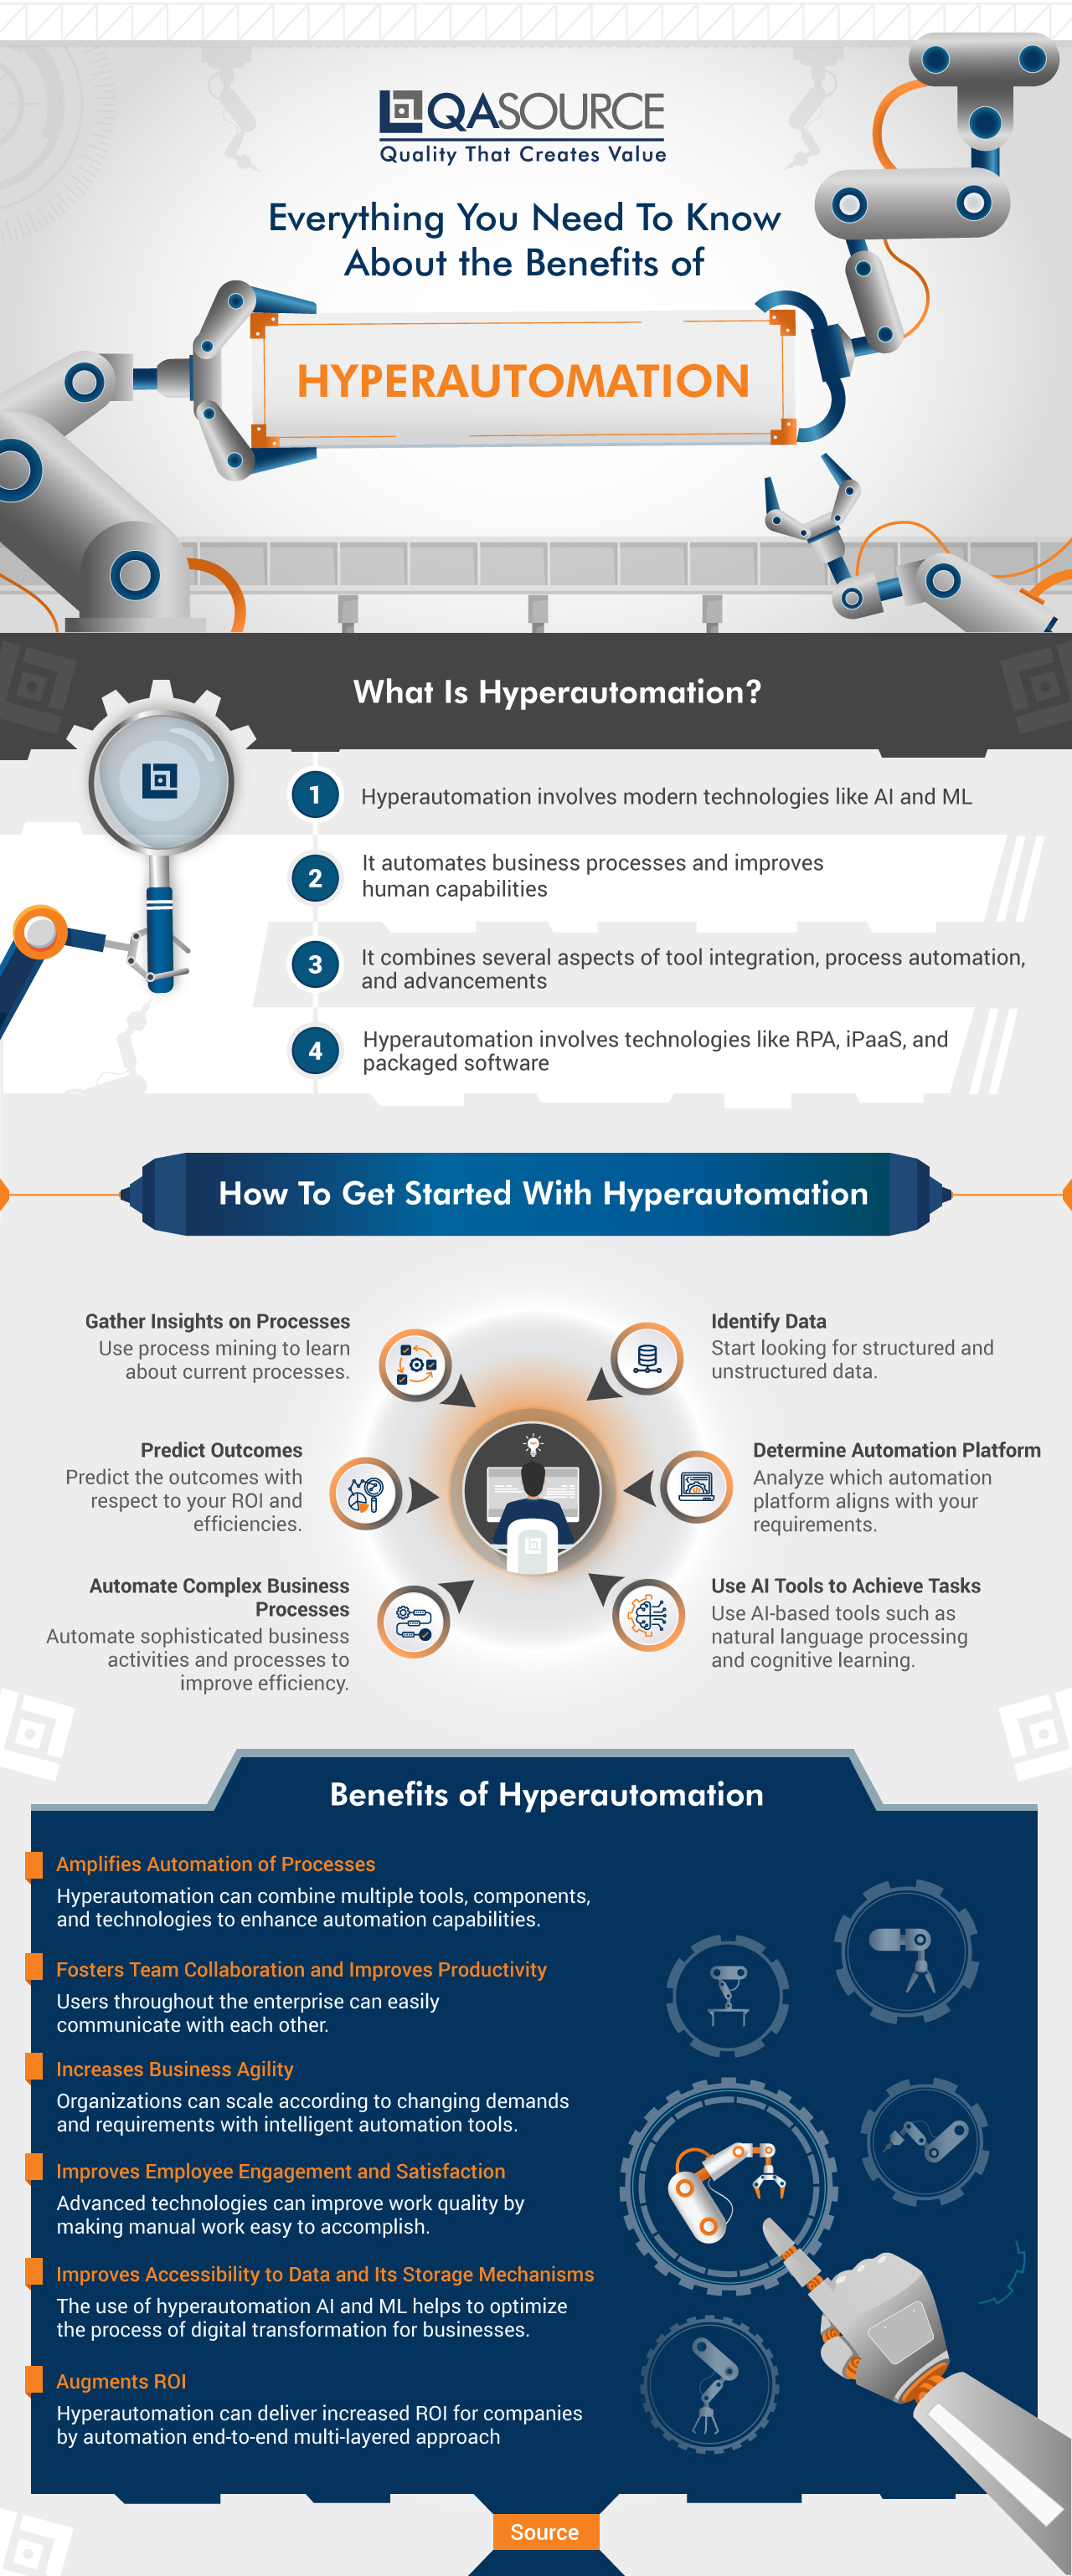 Everything You Need To Know About the Benefits of Hyperautomationg